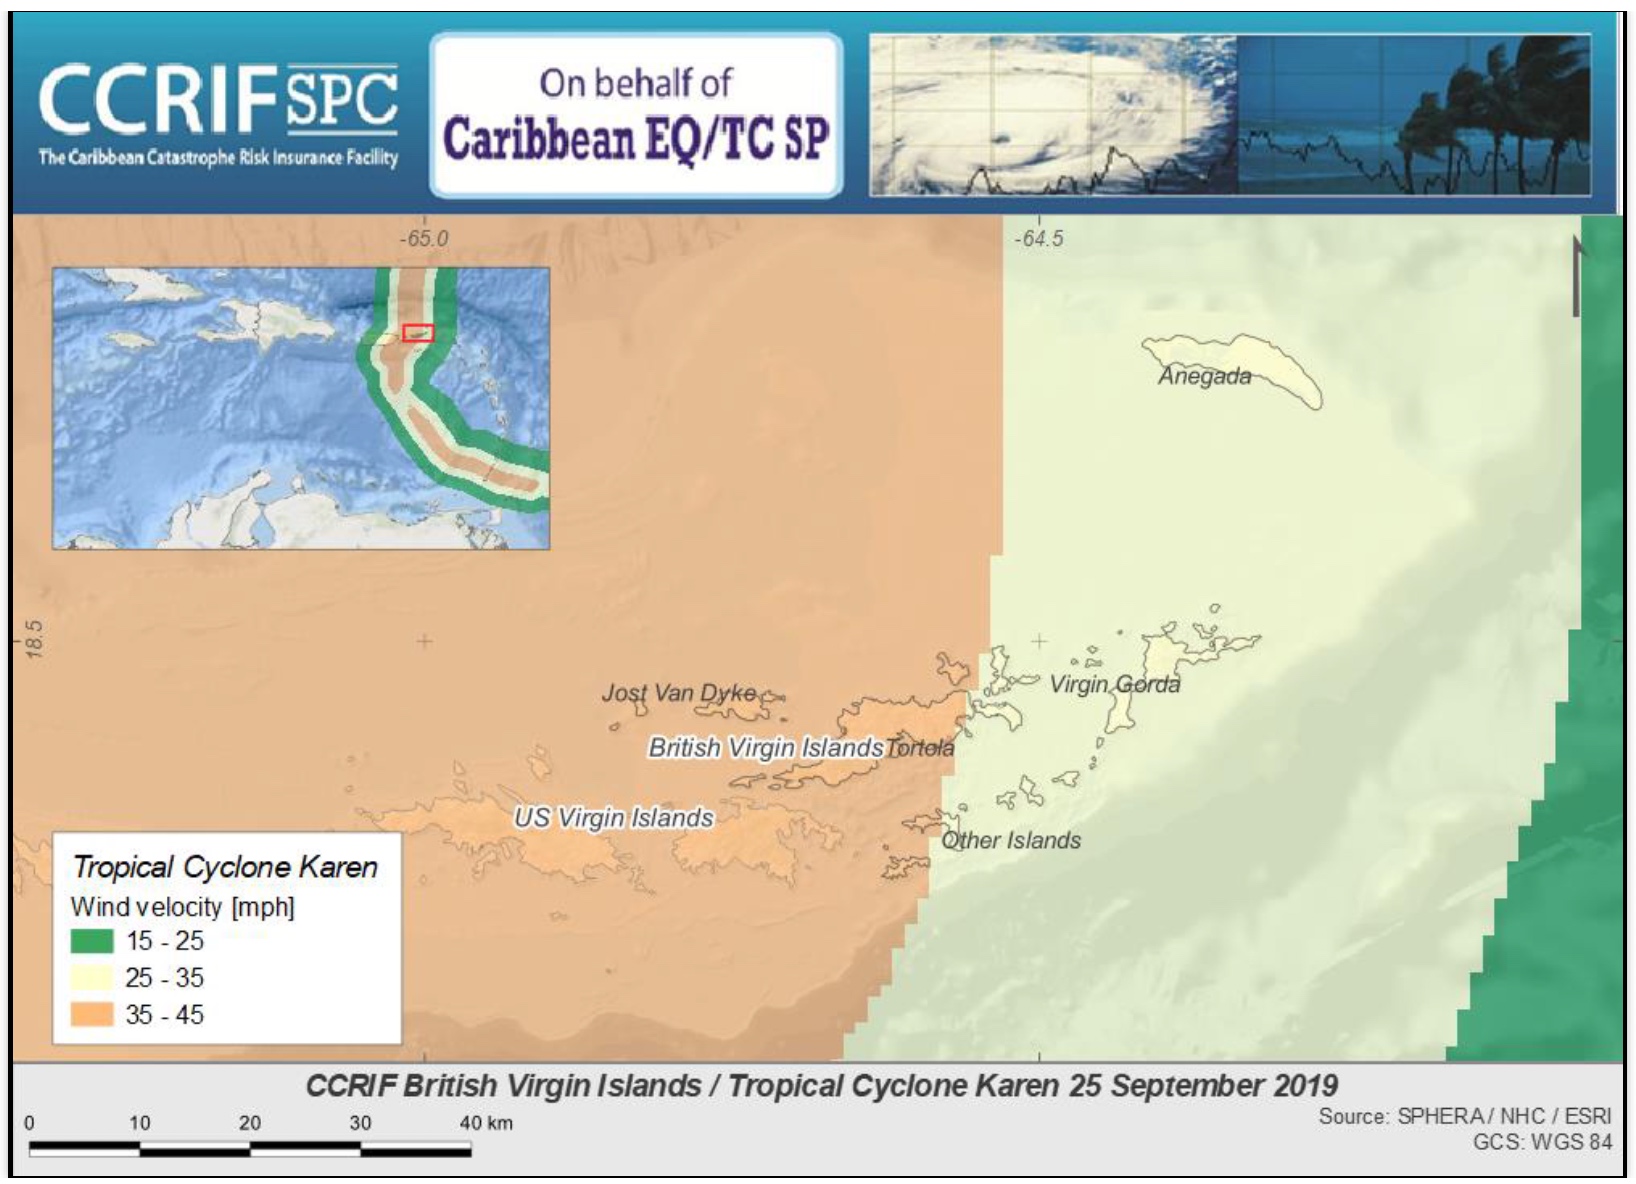 Event Briefing - Wind and Storm Surge - British Virgin Islands - September 27, 2019